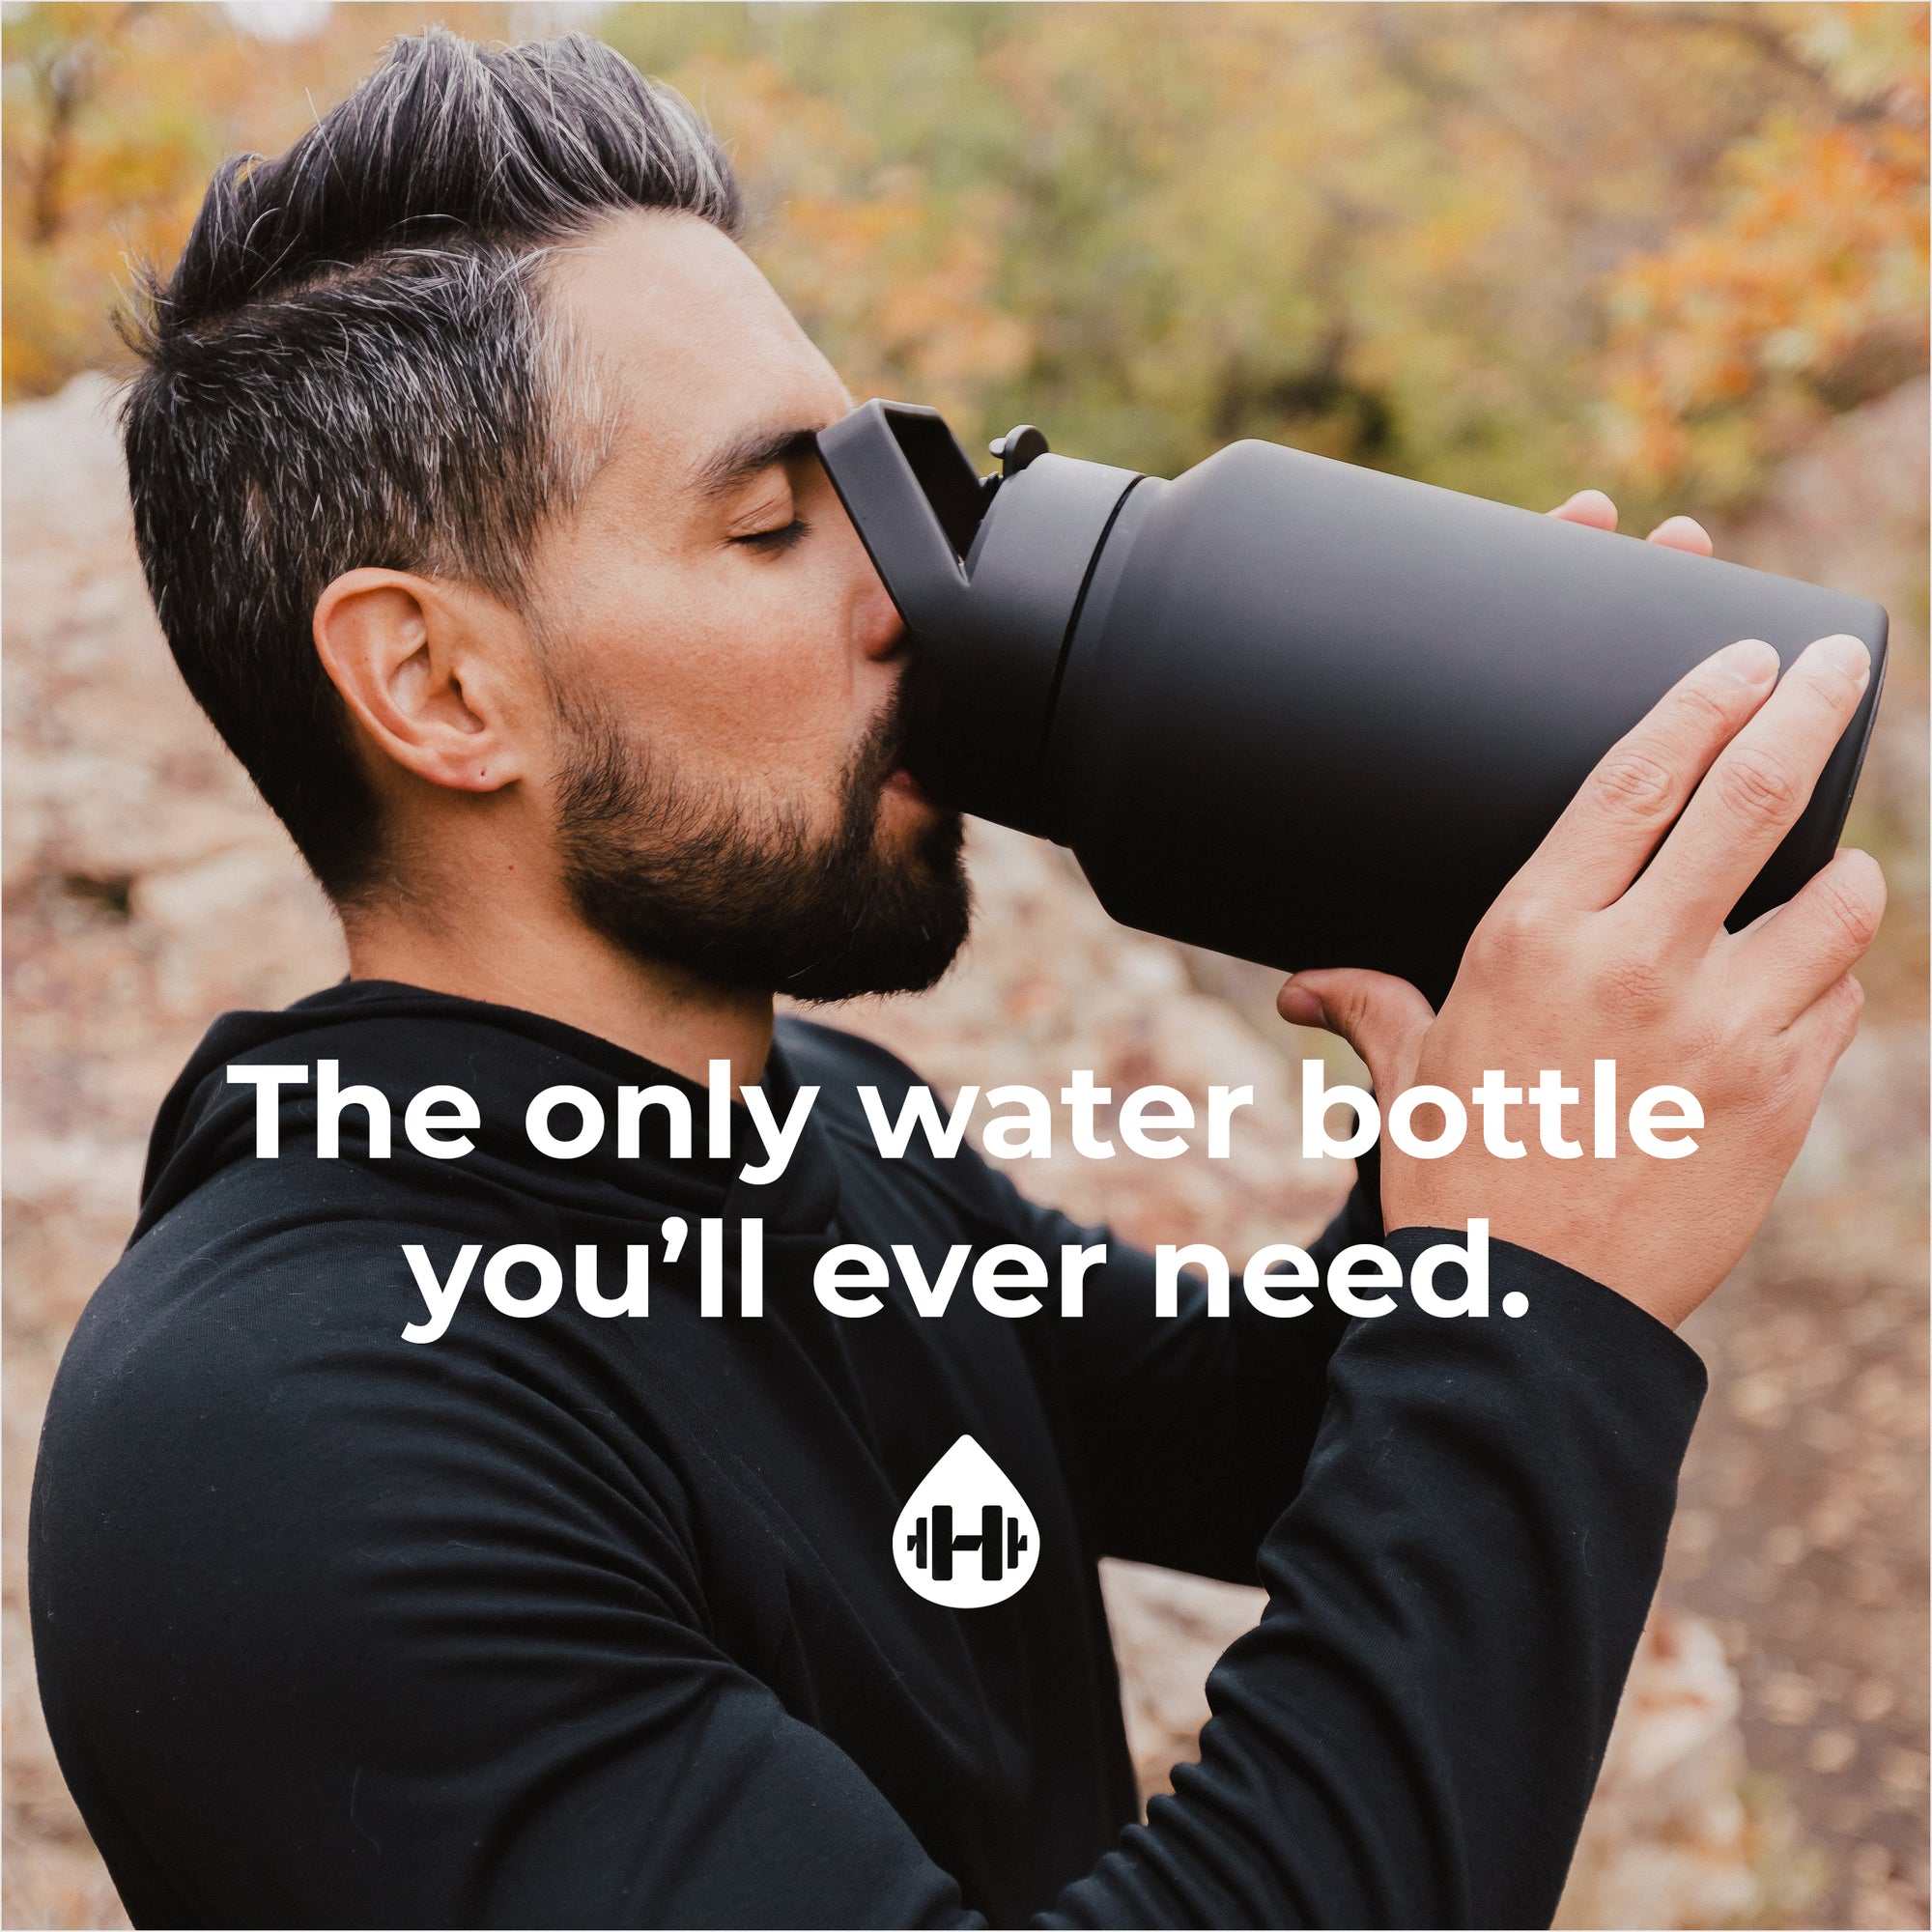 How to Choose the Best Stainless Steel Water Bottle